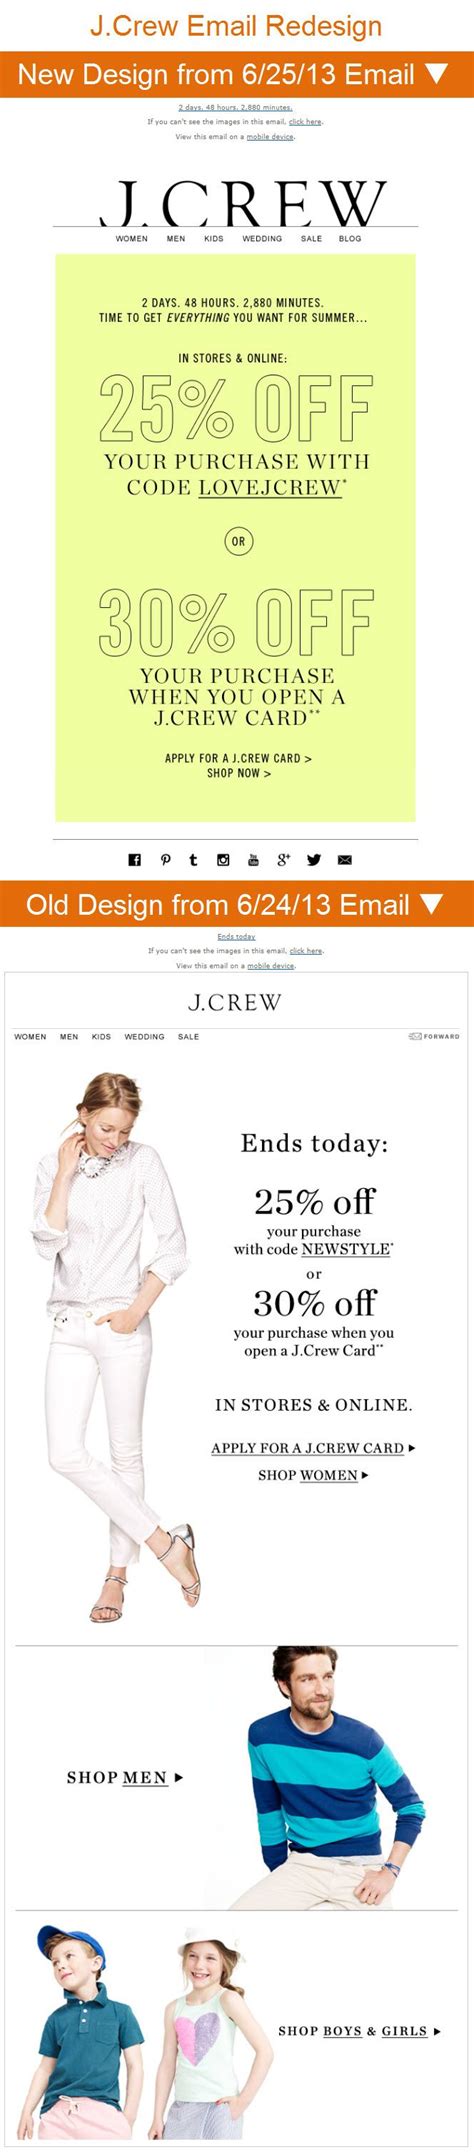 Jcrew Has Redesigned Their Email Template Changing Their Header So It